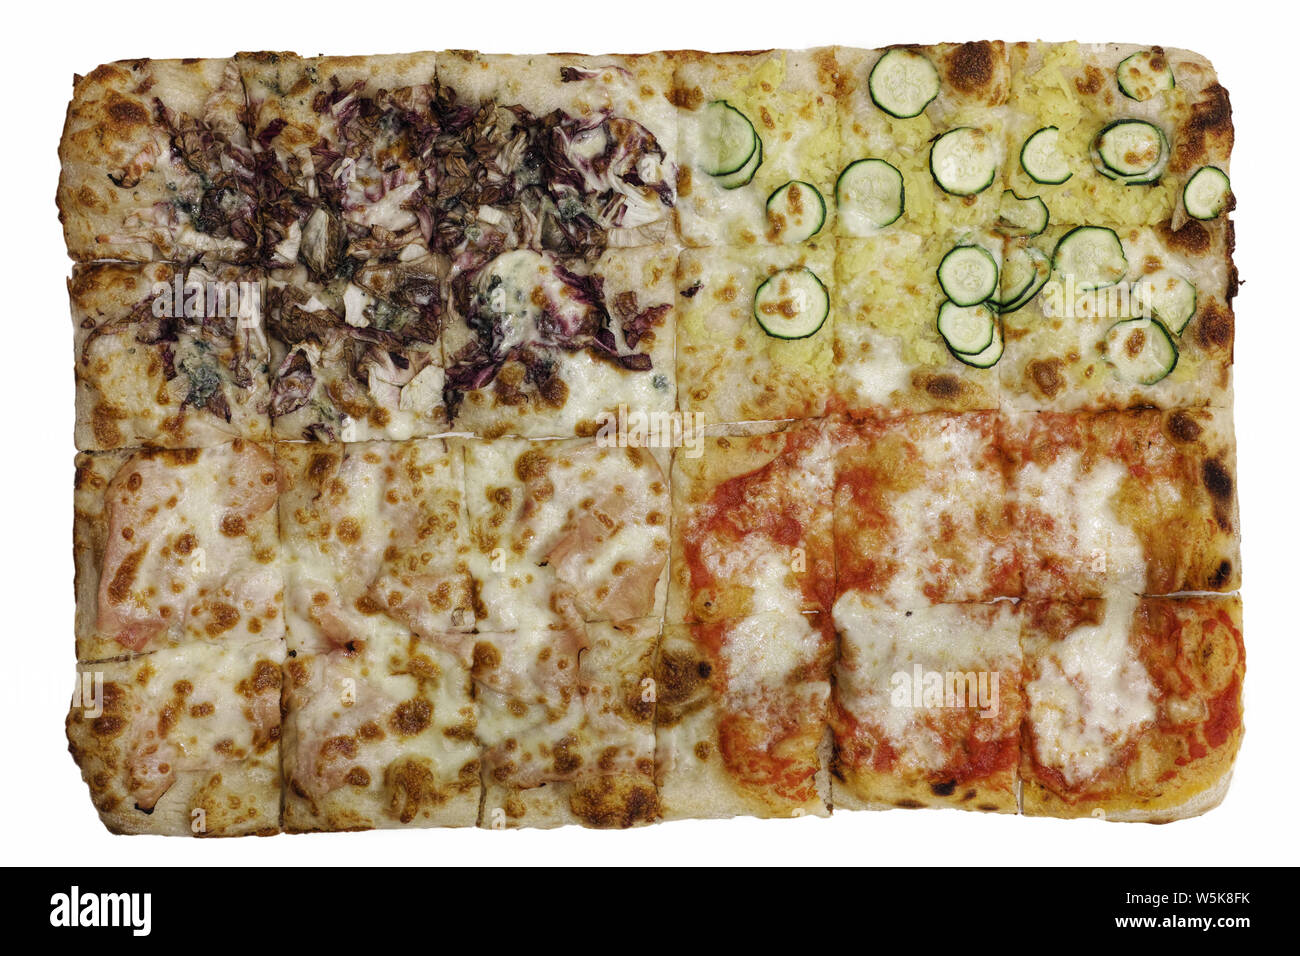 pizza with various toppings on the same basis Stock Photo